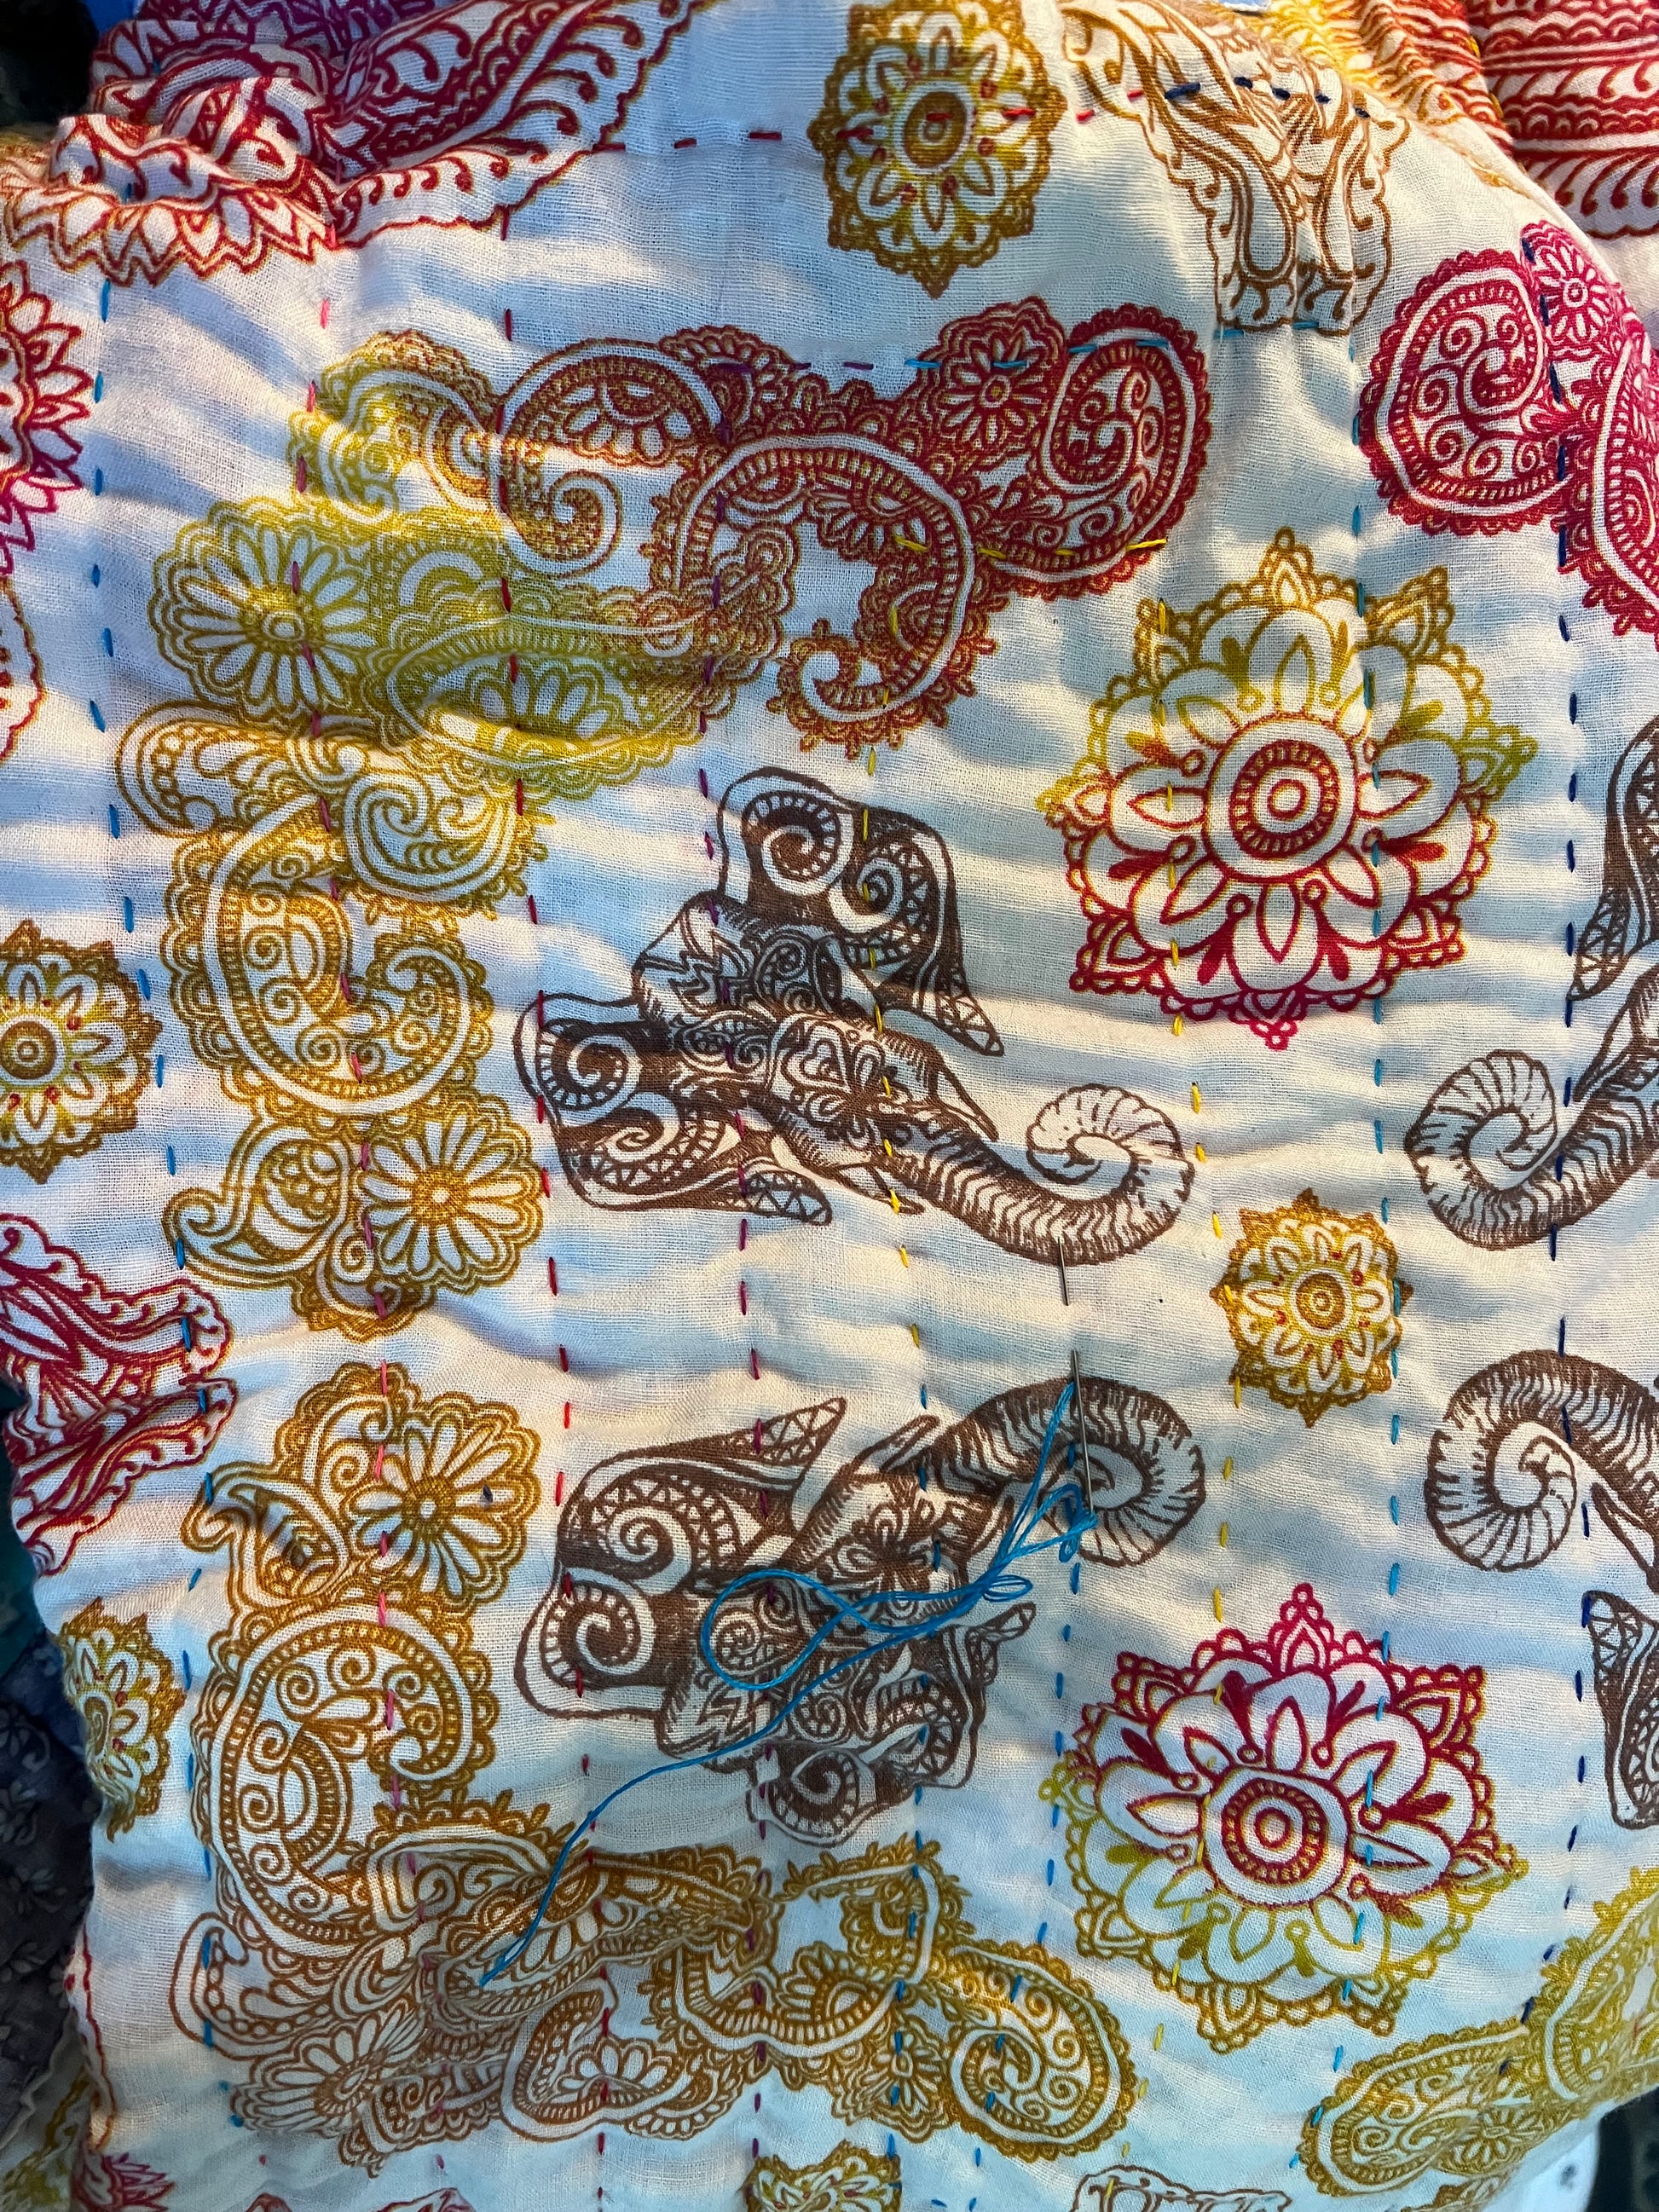 another closeup of hand stitching, this is a bandana with elephants and filigree design